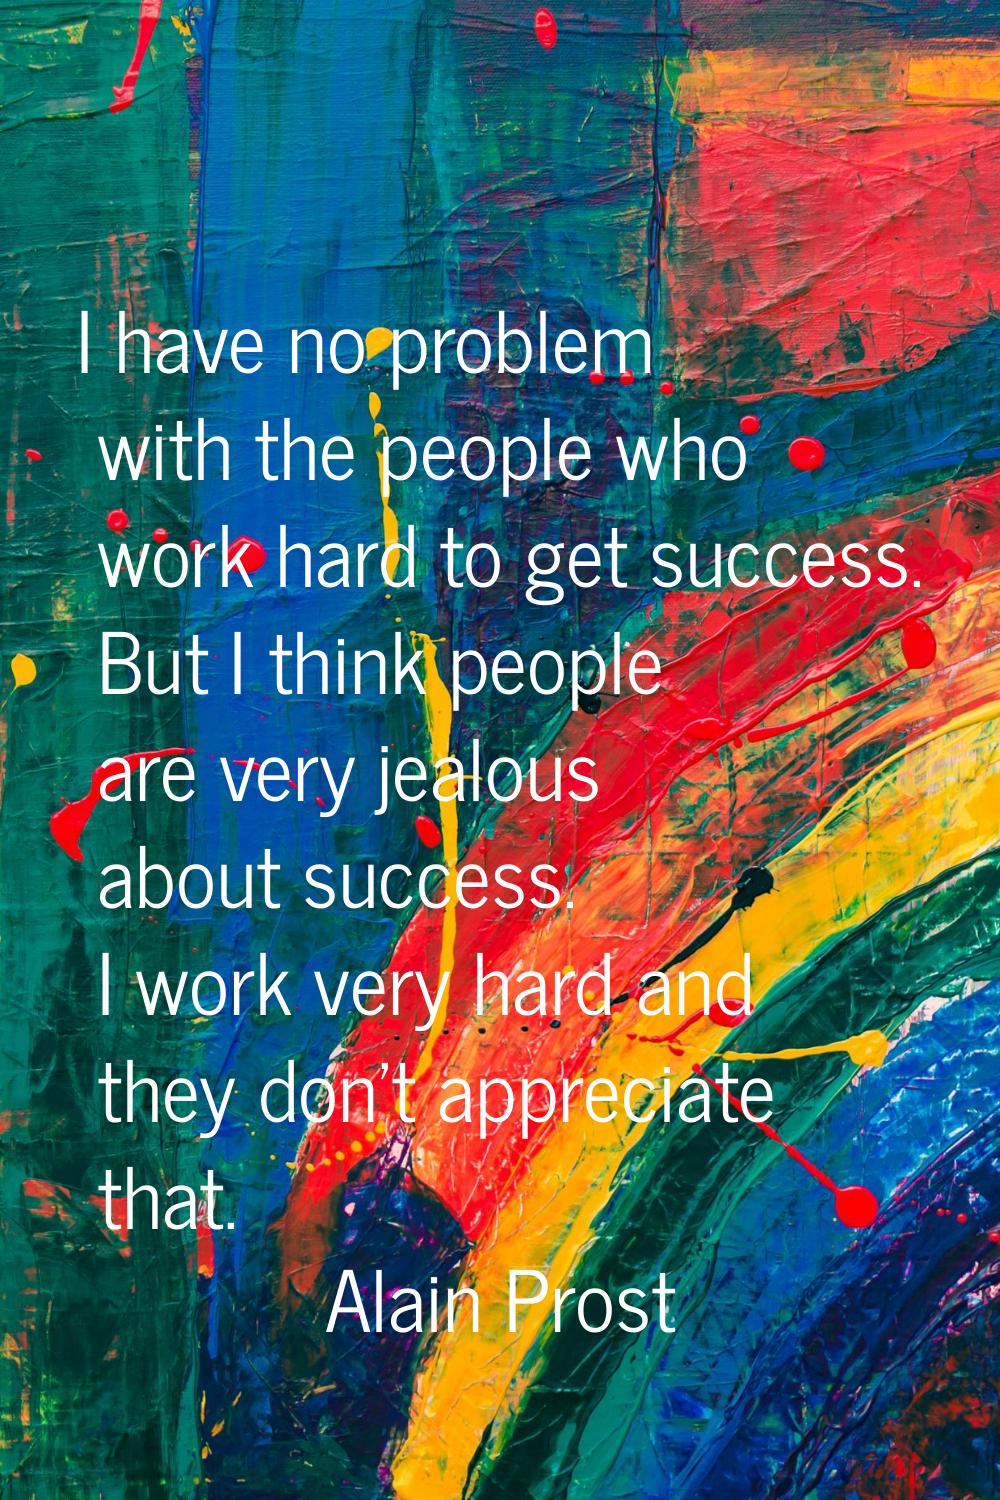 I have no problem with the people who work hard to get success. But I think people are very jealous